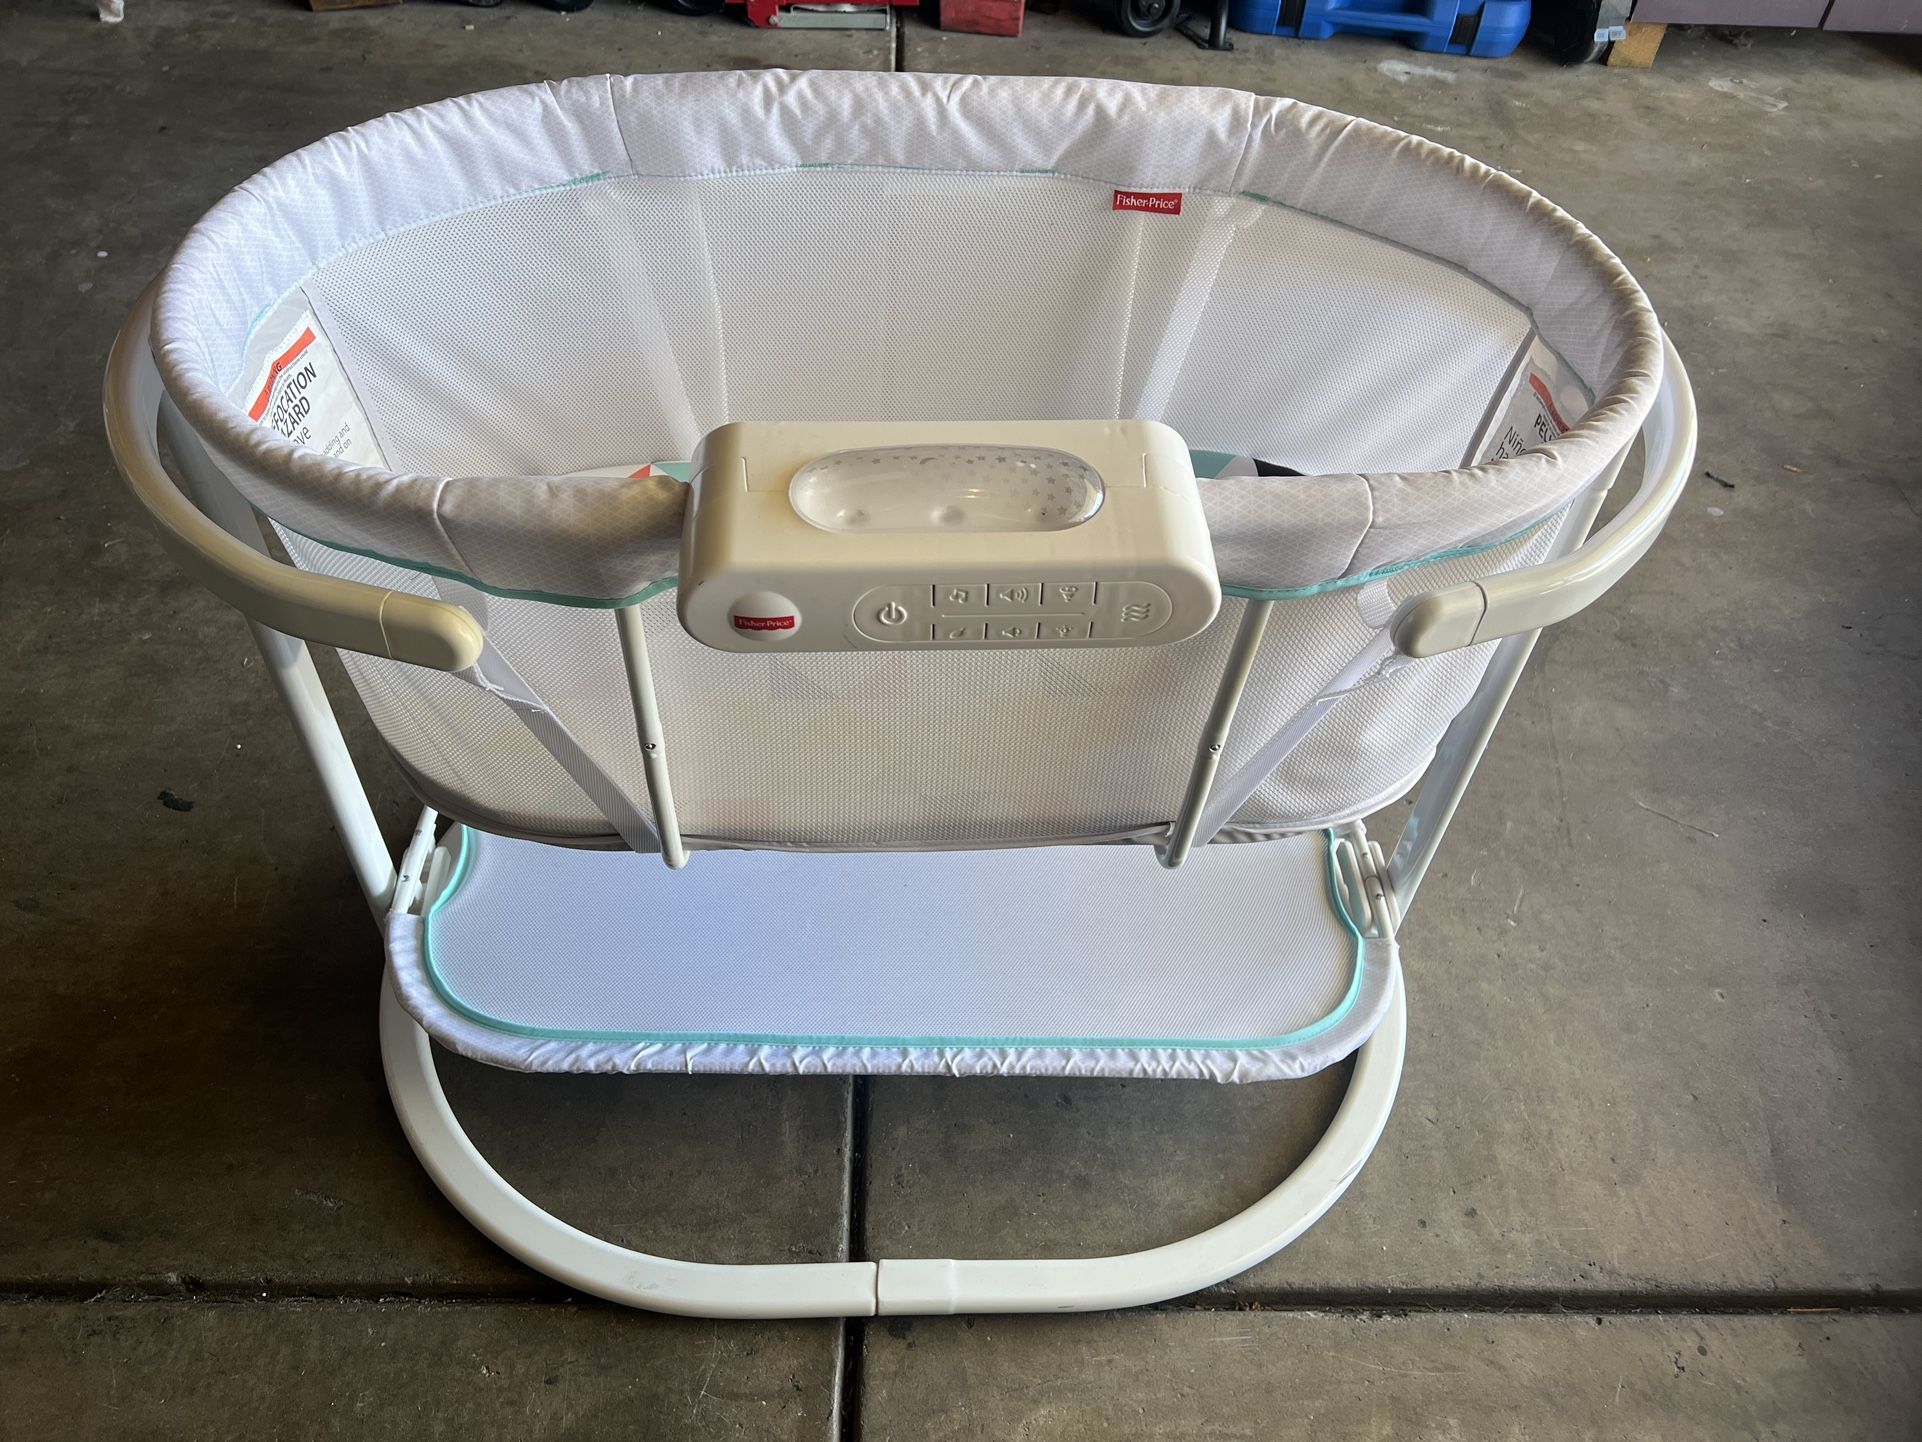 Bassinet Soothing Motions & Night Light Fisher Price